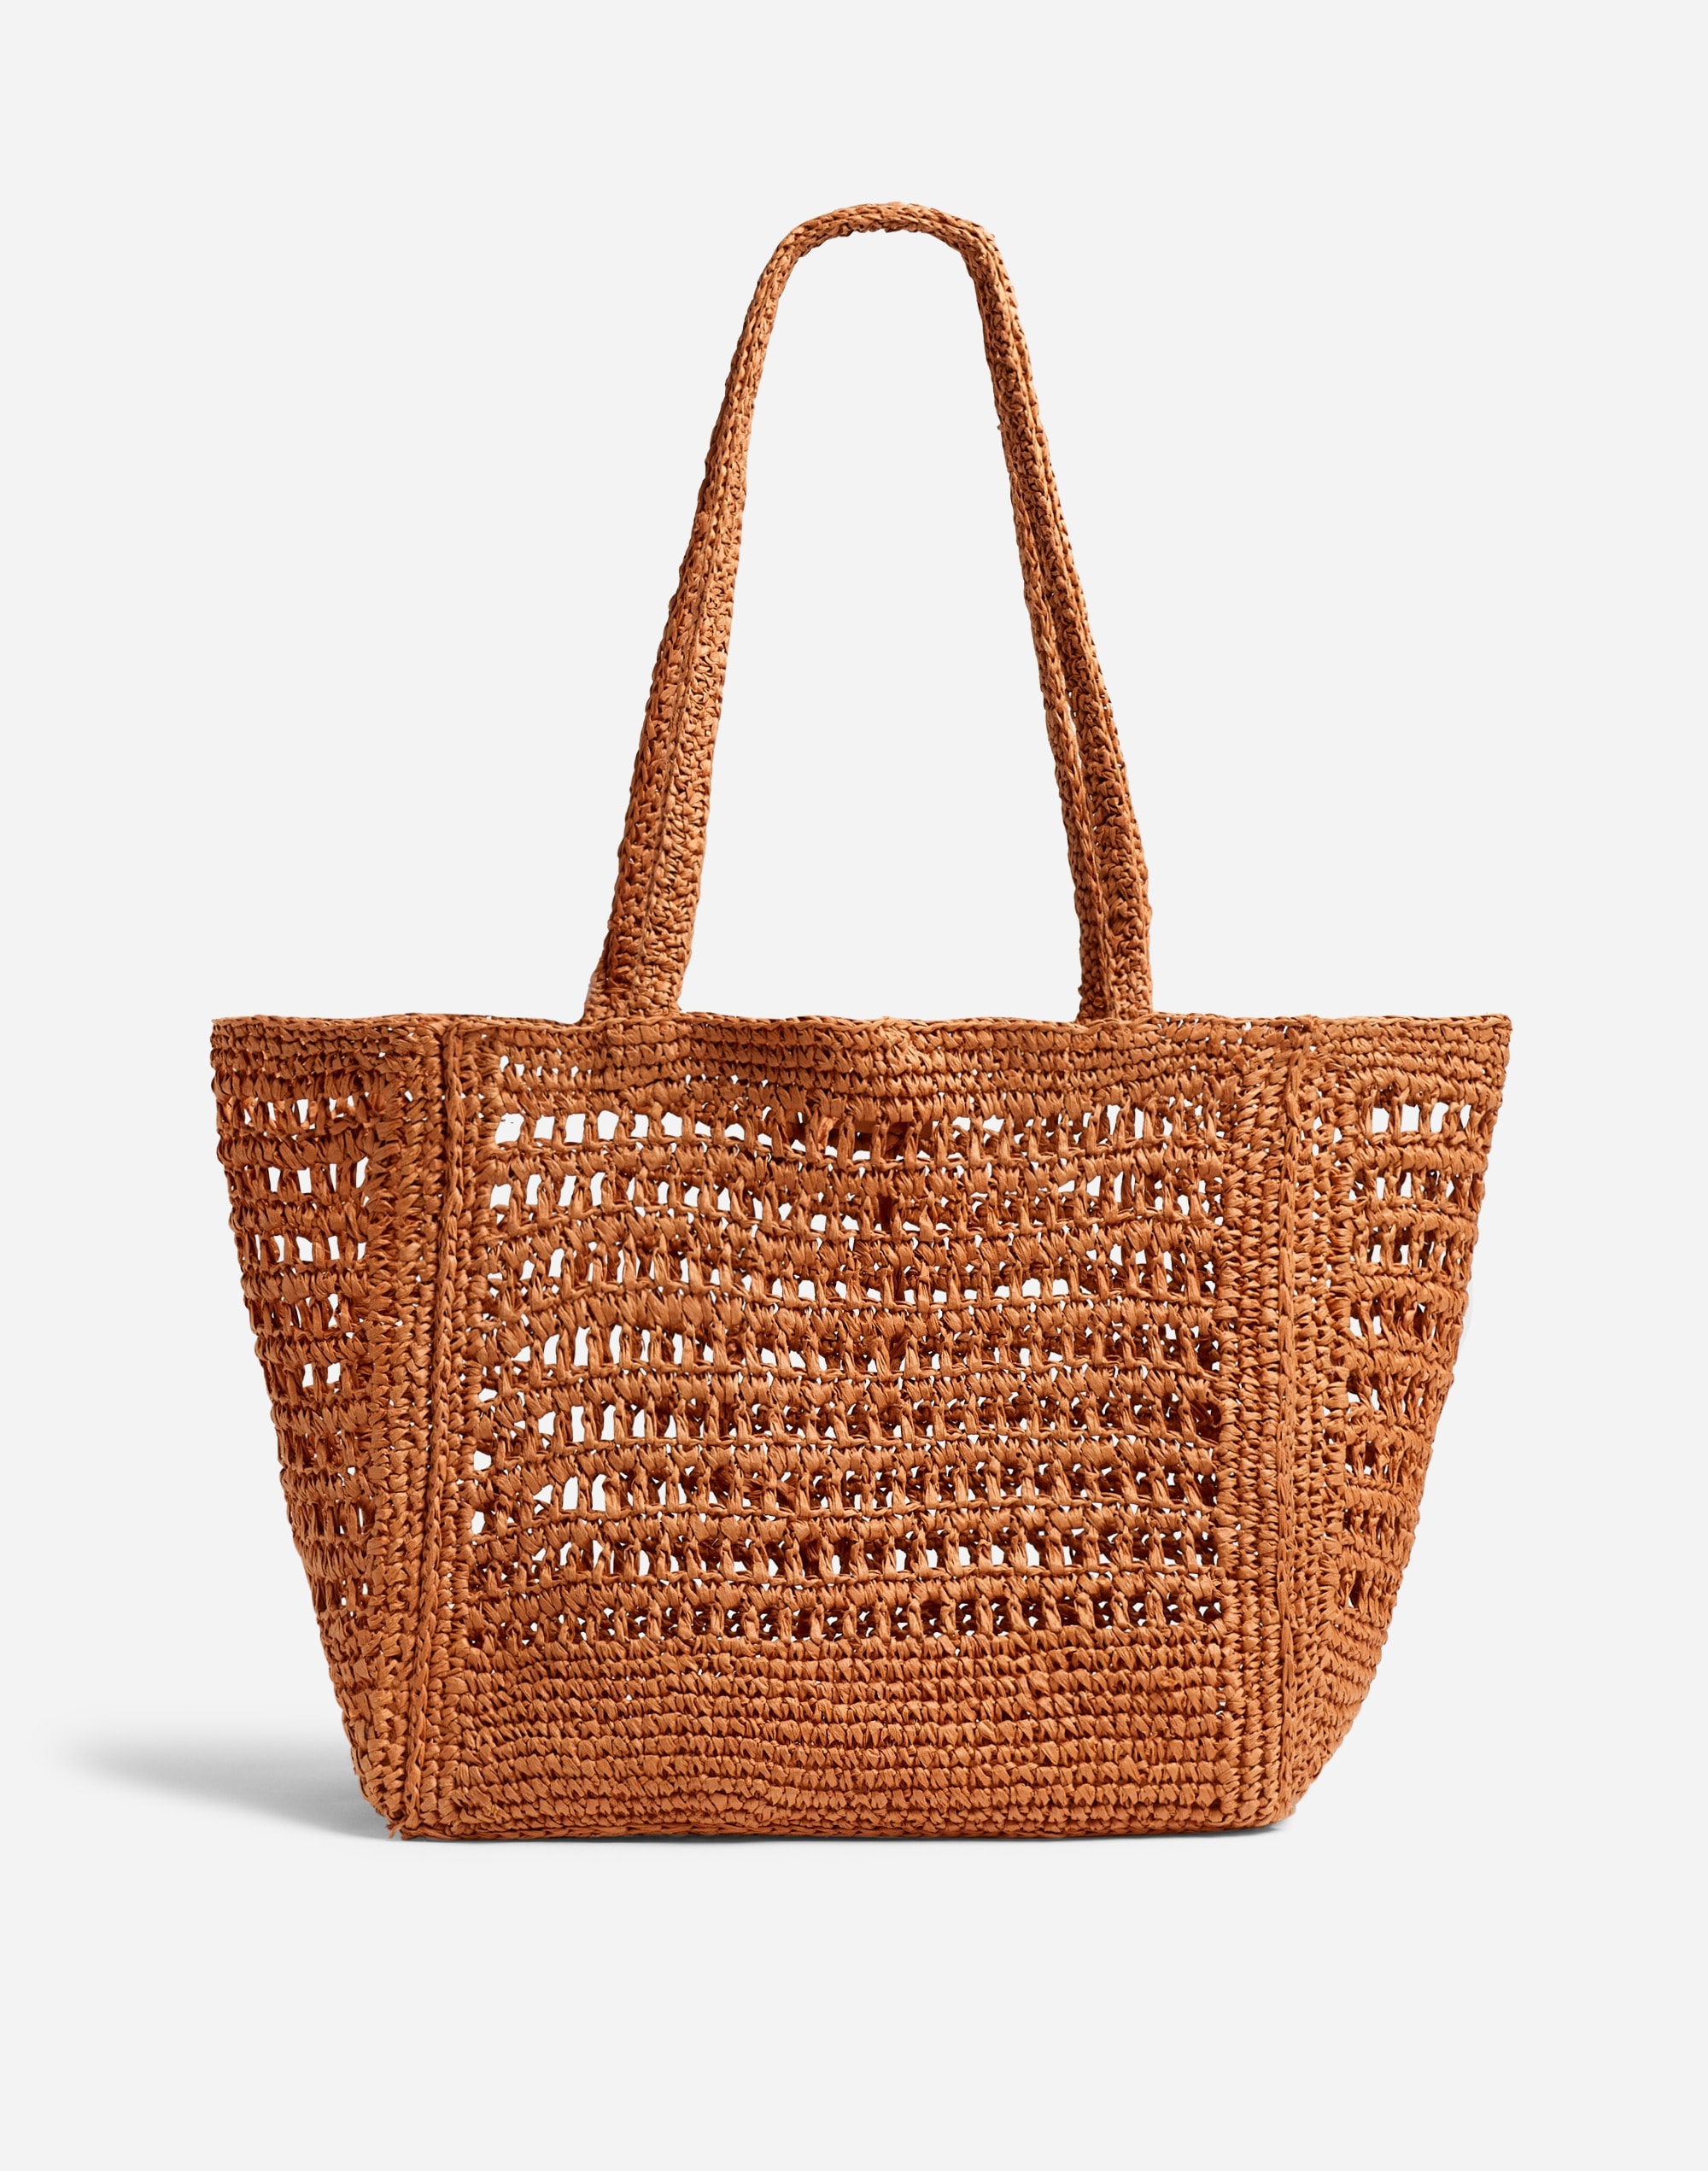 The Open-Crochet Straw Packable Tote